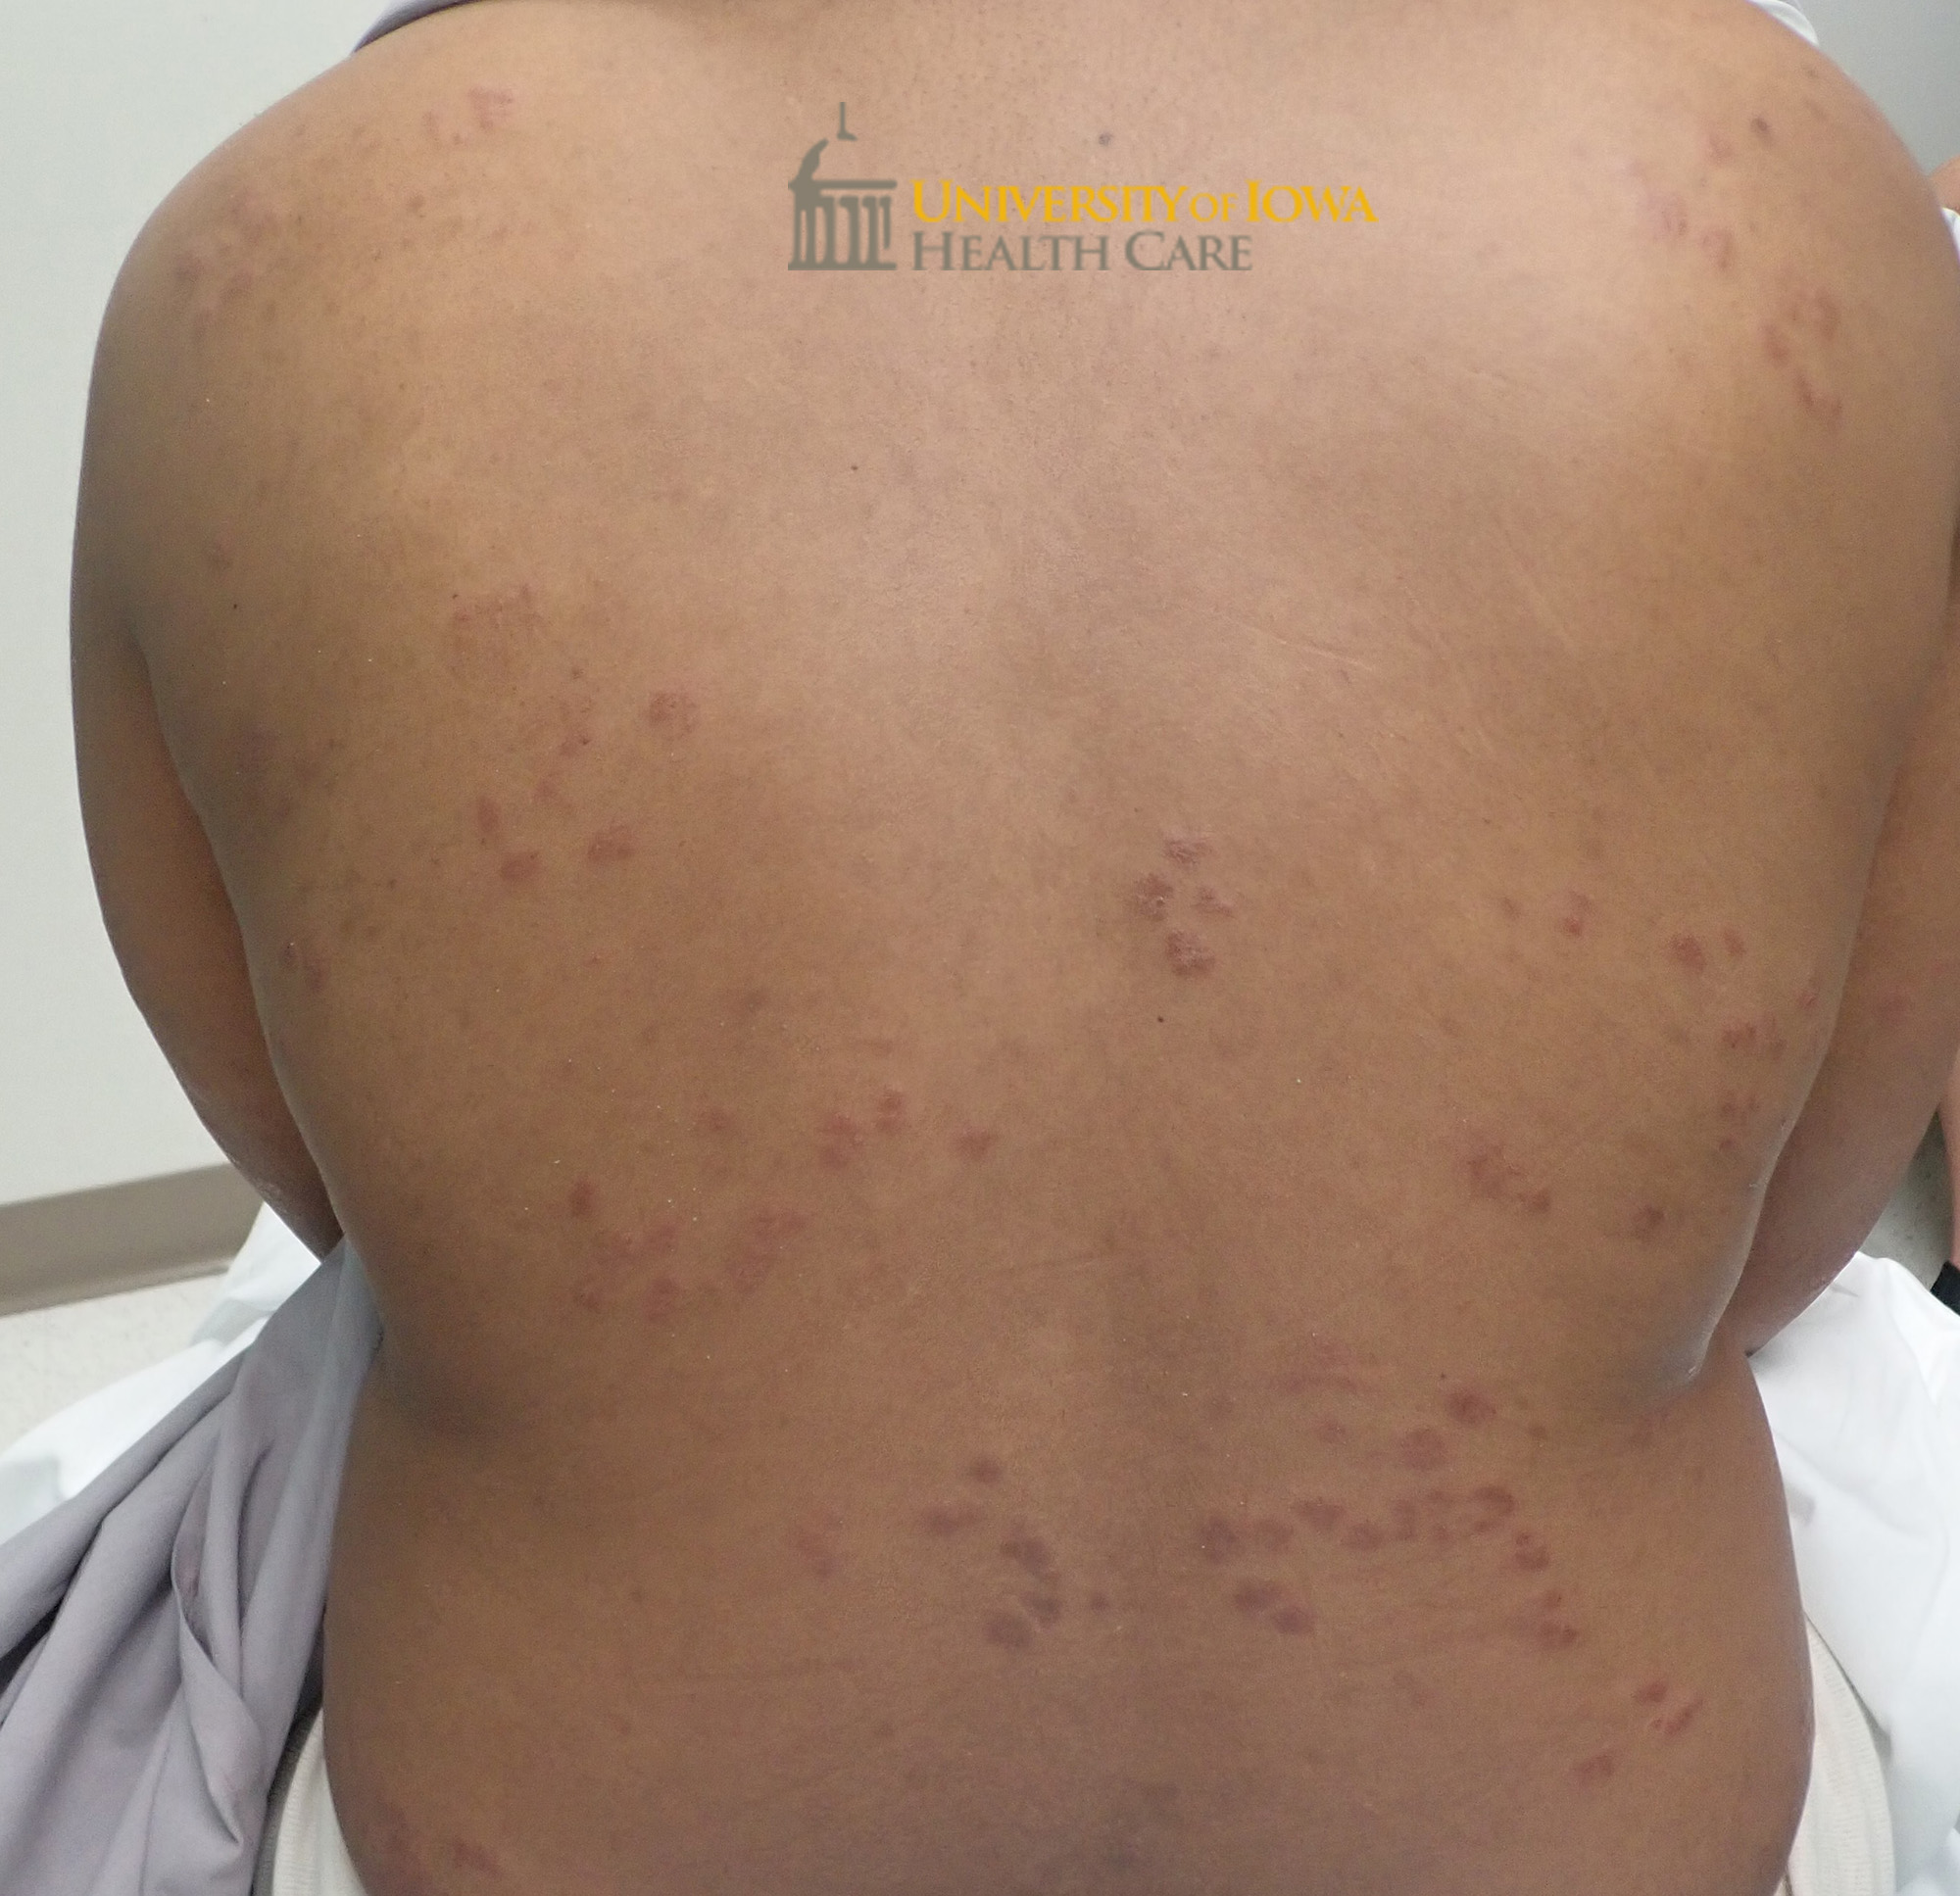 Annular red-brown plaques and papules on the back. (click images for higher resolution).